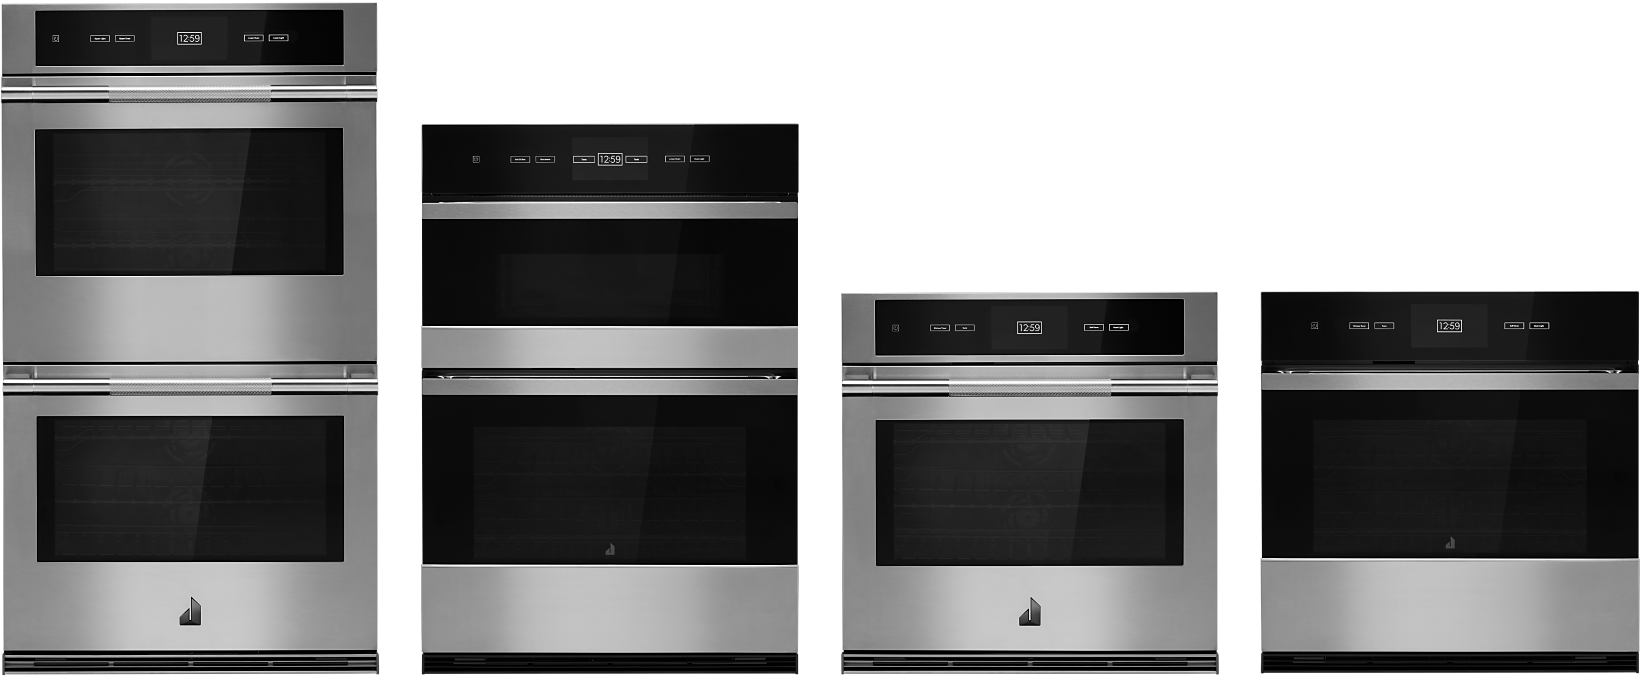 https://kitchenaid-h.assetsadobe.com/is/image/content/dam/business-unit/jennair/en_us/articles/types-of-high-end-wall-ovens/High-End-Wall-Oven-img3.png?fmt=png-alpha&qlt=85,0&resMode=sharp2&op_usm=1.75,0.3,2,0&scl=1&constrain=fit,1